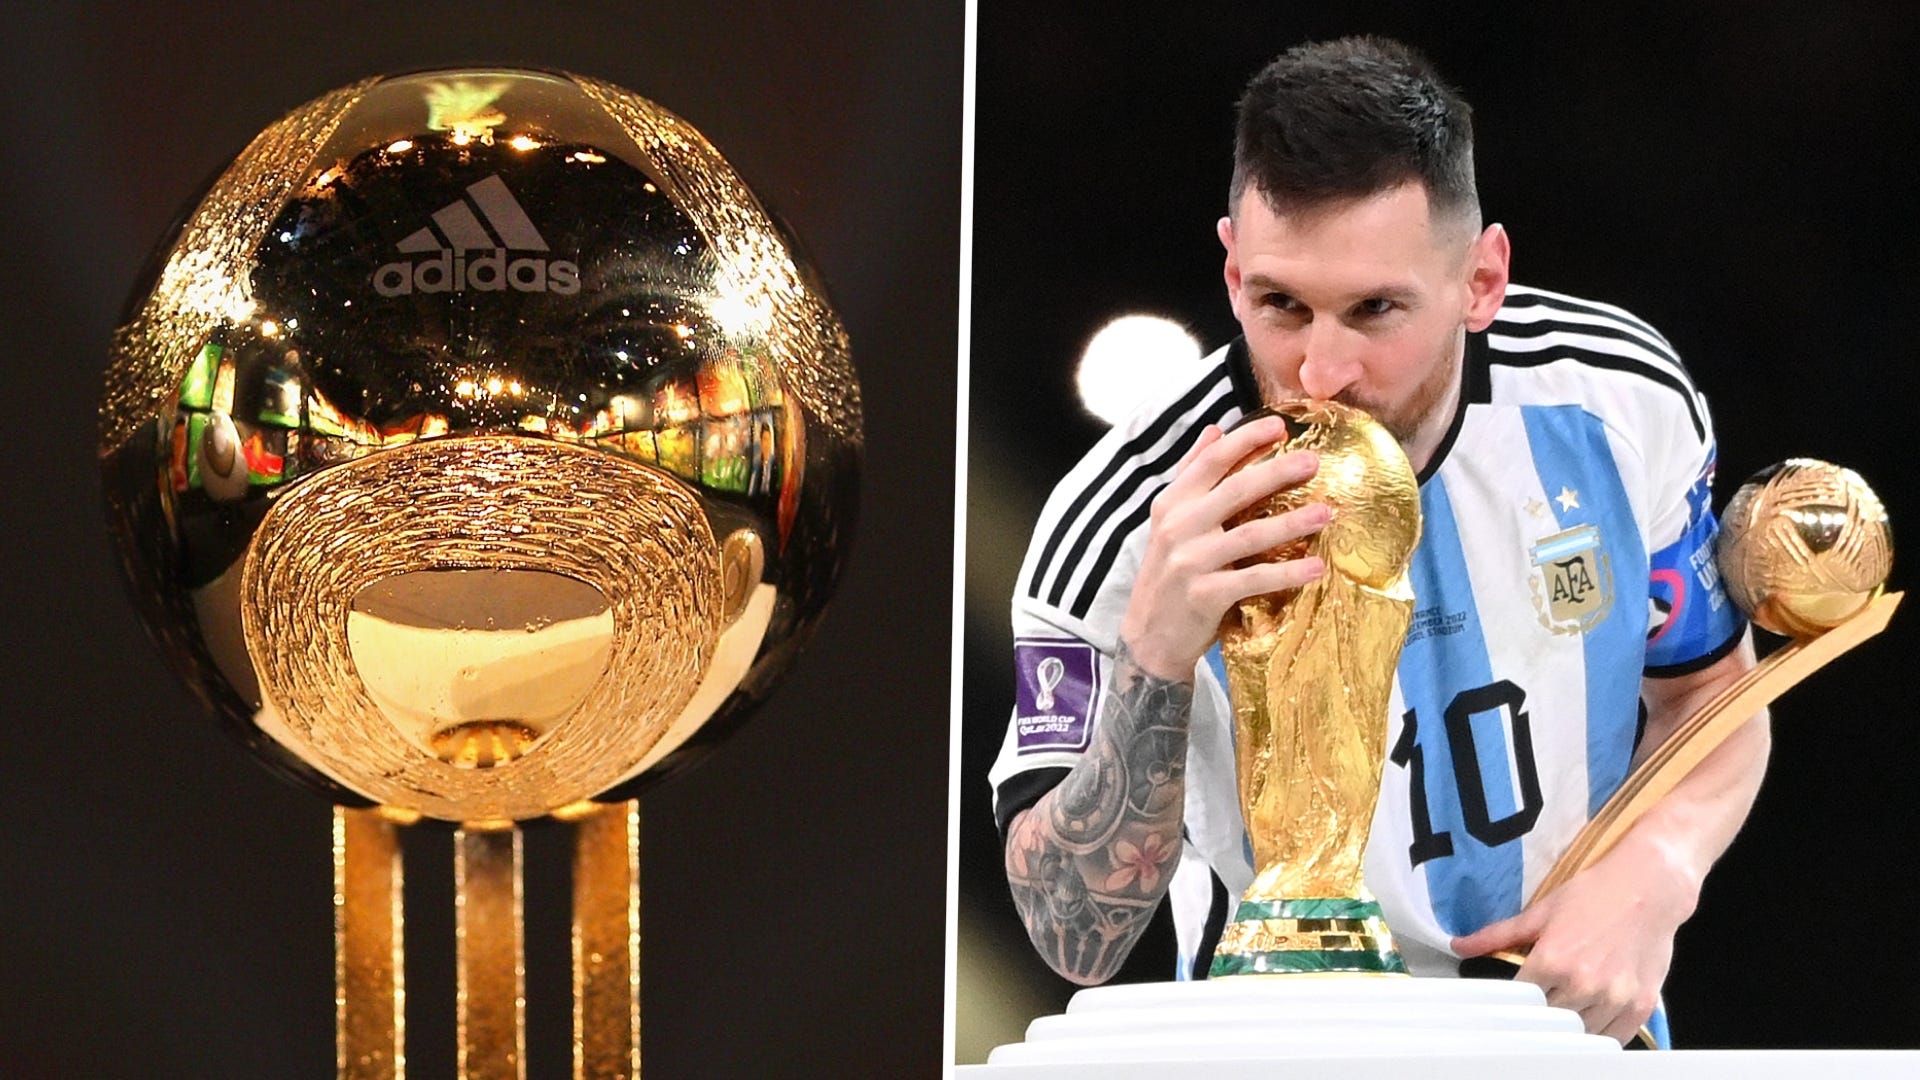 Full list: Every award winner at the 2023 World Cup as star scoops Golden  Ball